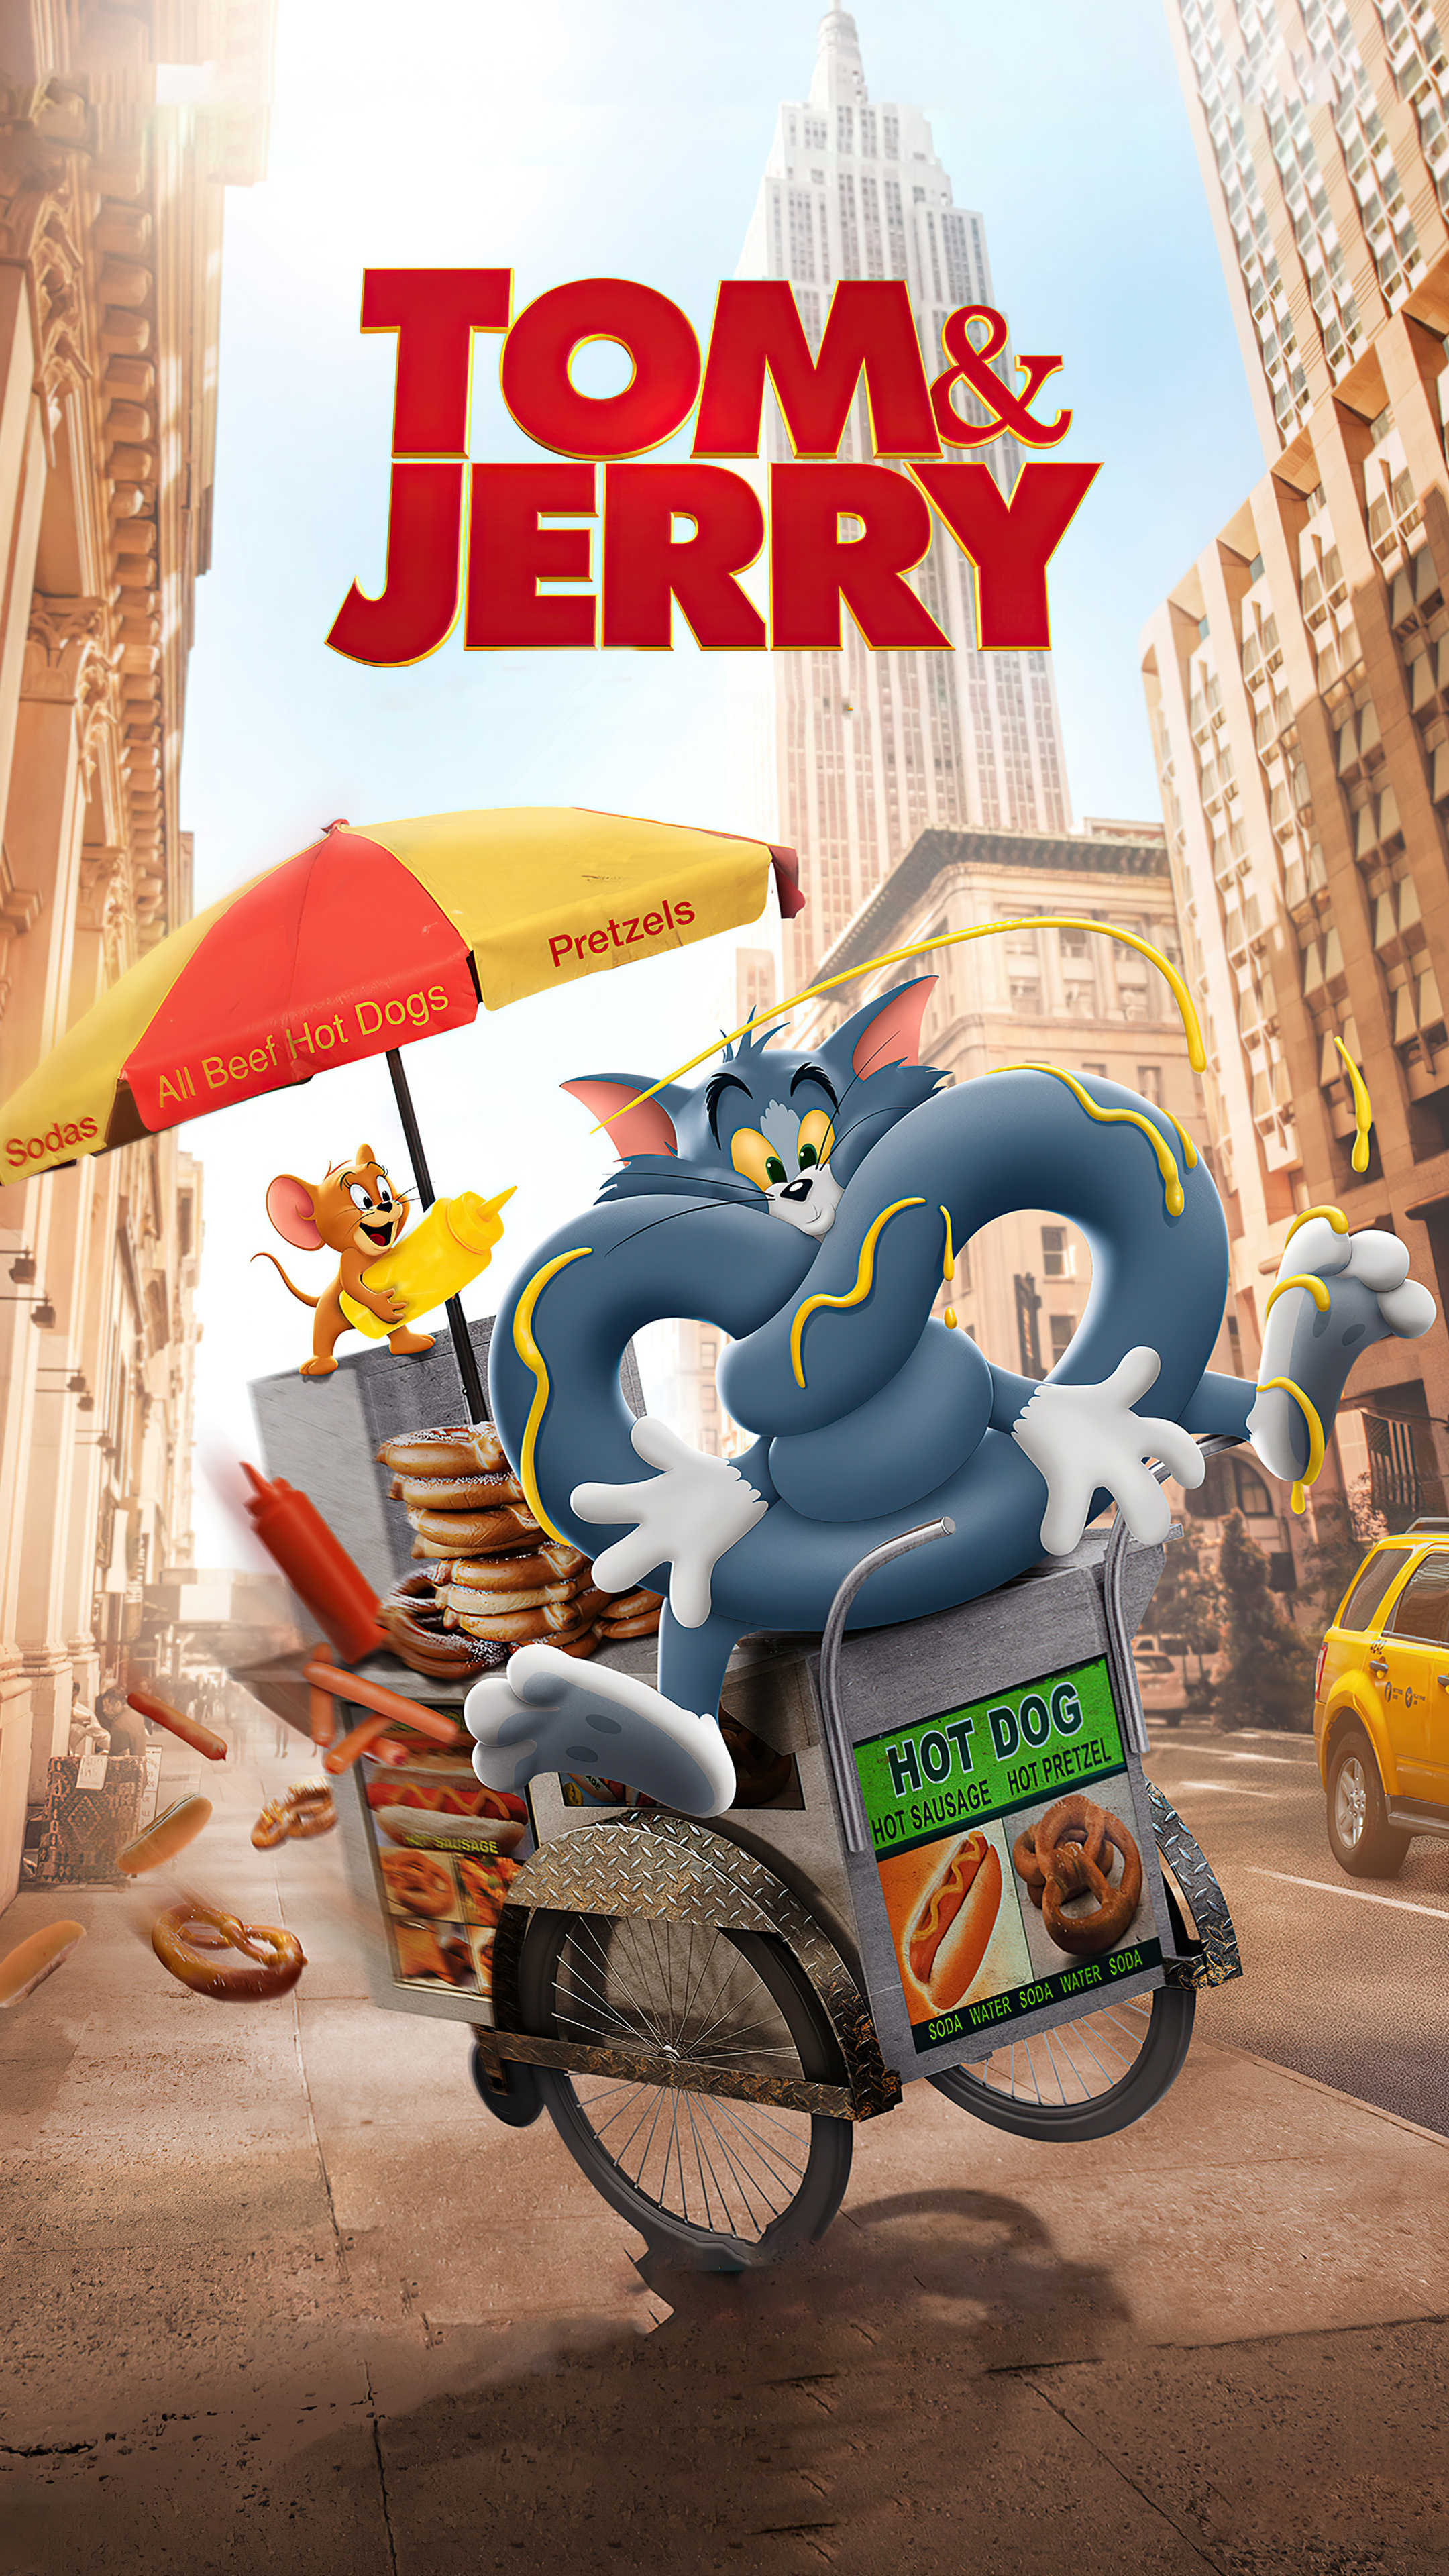 Tom and Jerry 2021, 4k resolution, Stunning visuals, Memorable moments, 2160x3840 4K Phone